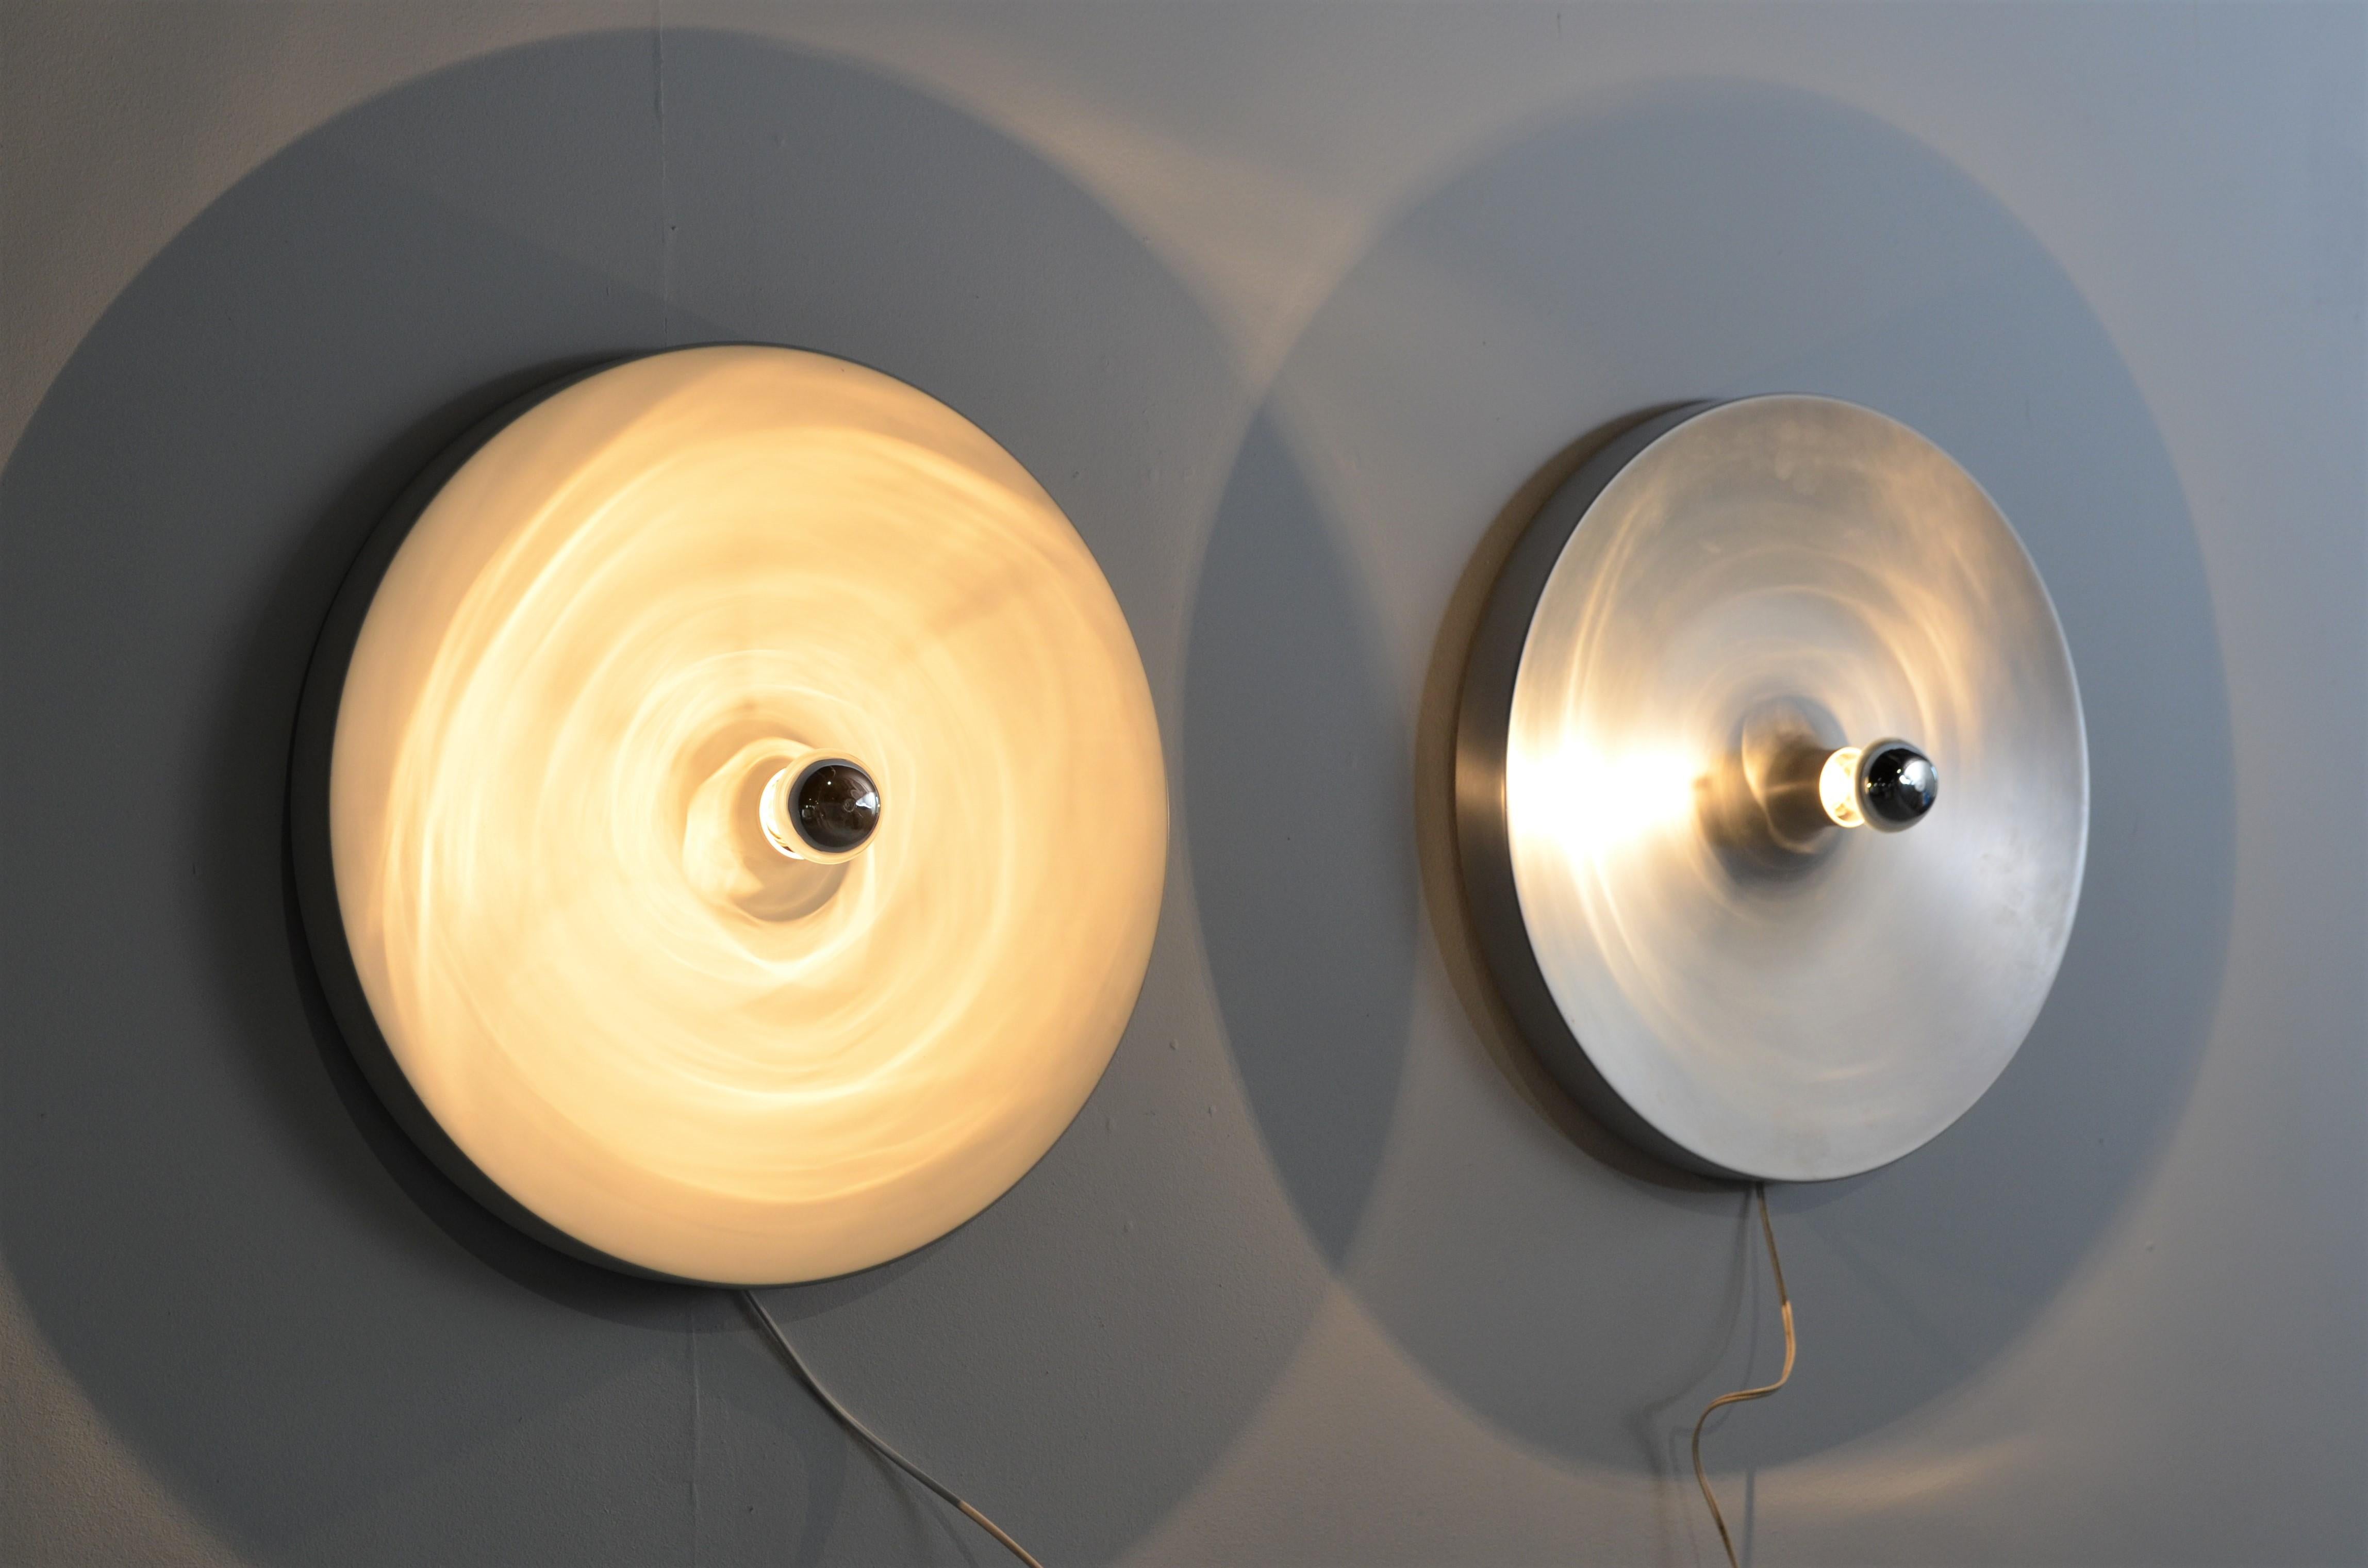 Mid-Century Modern Les Arcs wall sconce Charlotte Perriand by Honsel Leuchten, Germany